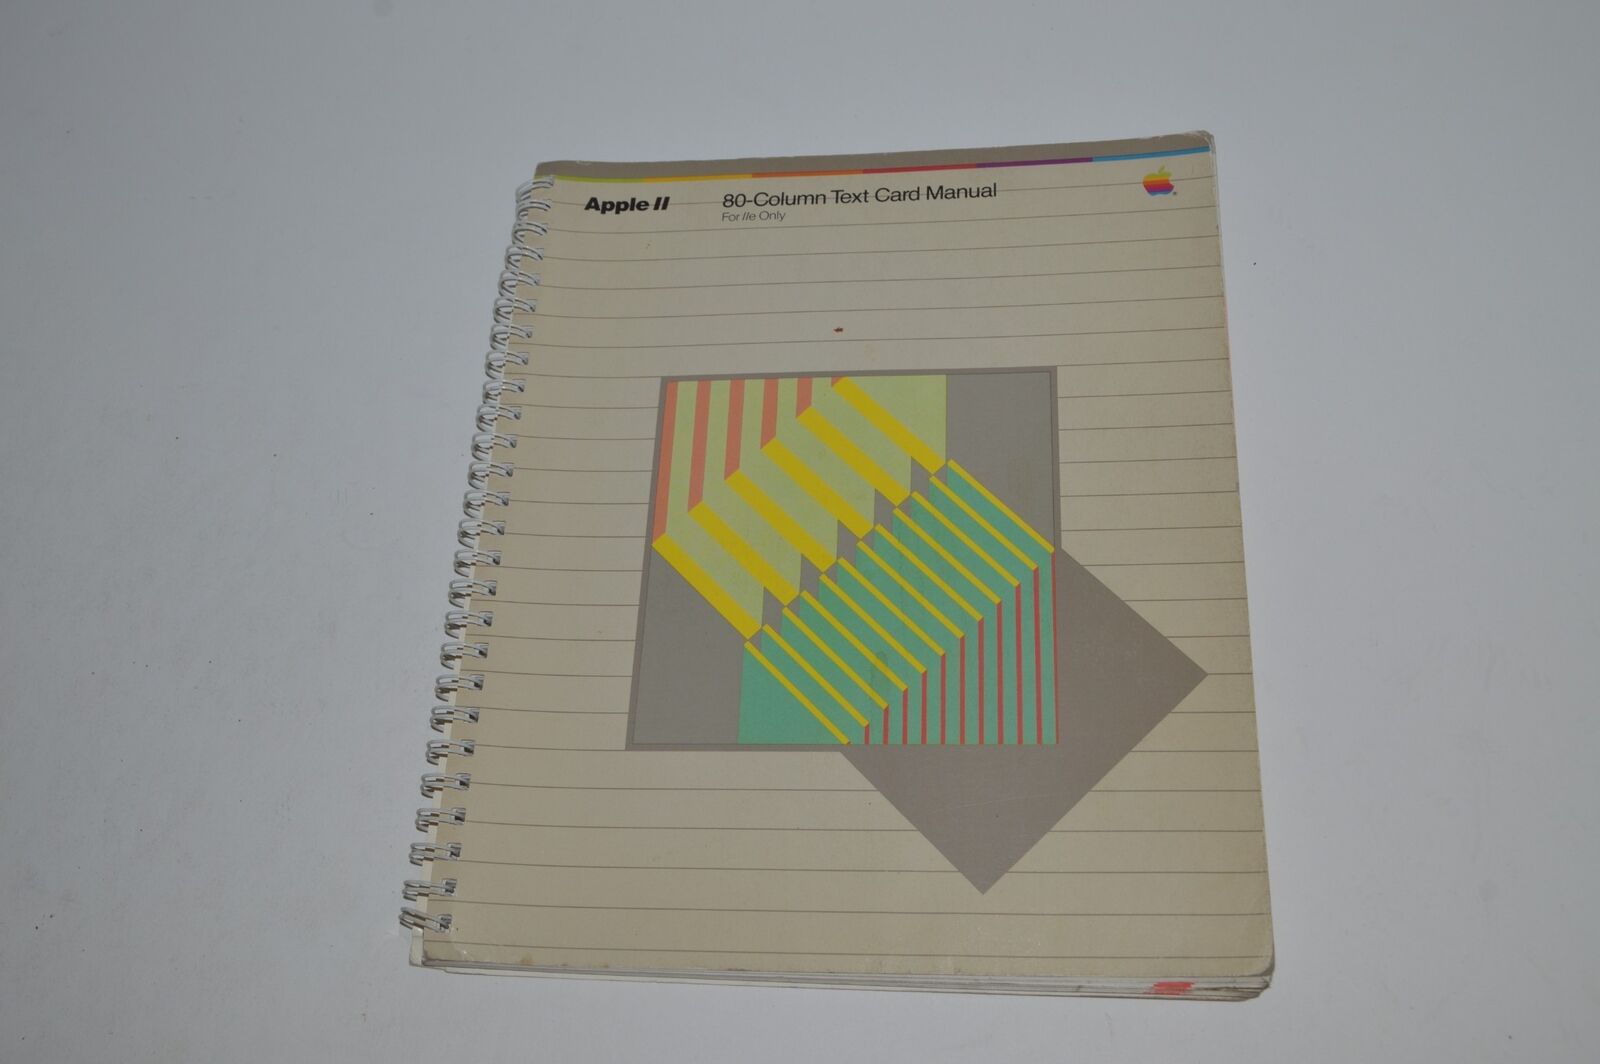 *TC* APPLE II 80-COLUMN TEXT CARD SUPPLEMENT FOR IIE ONLY (BOOK954)